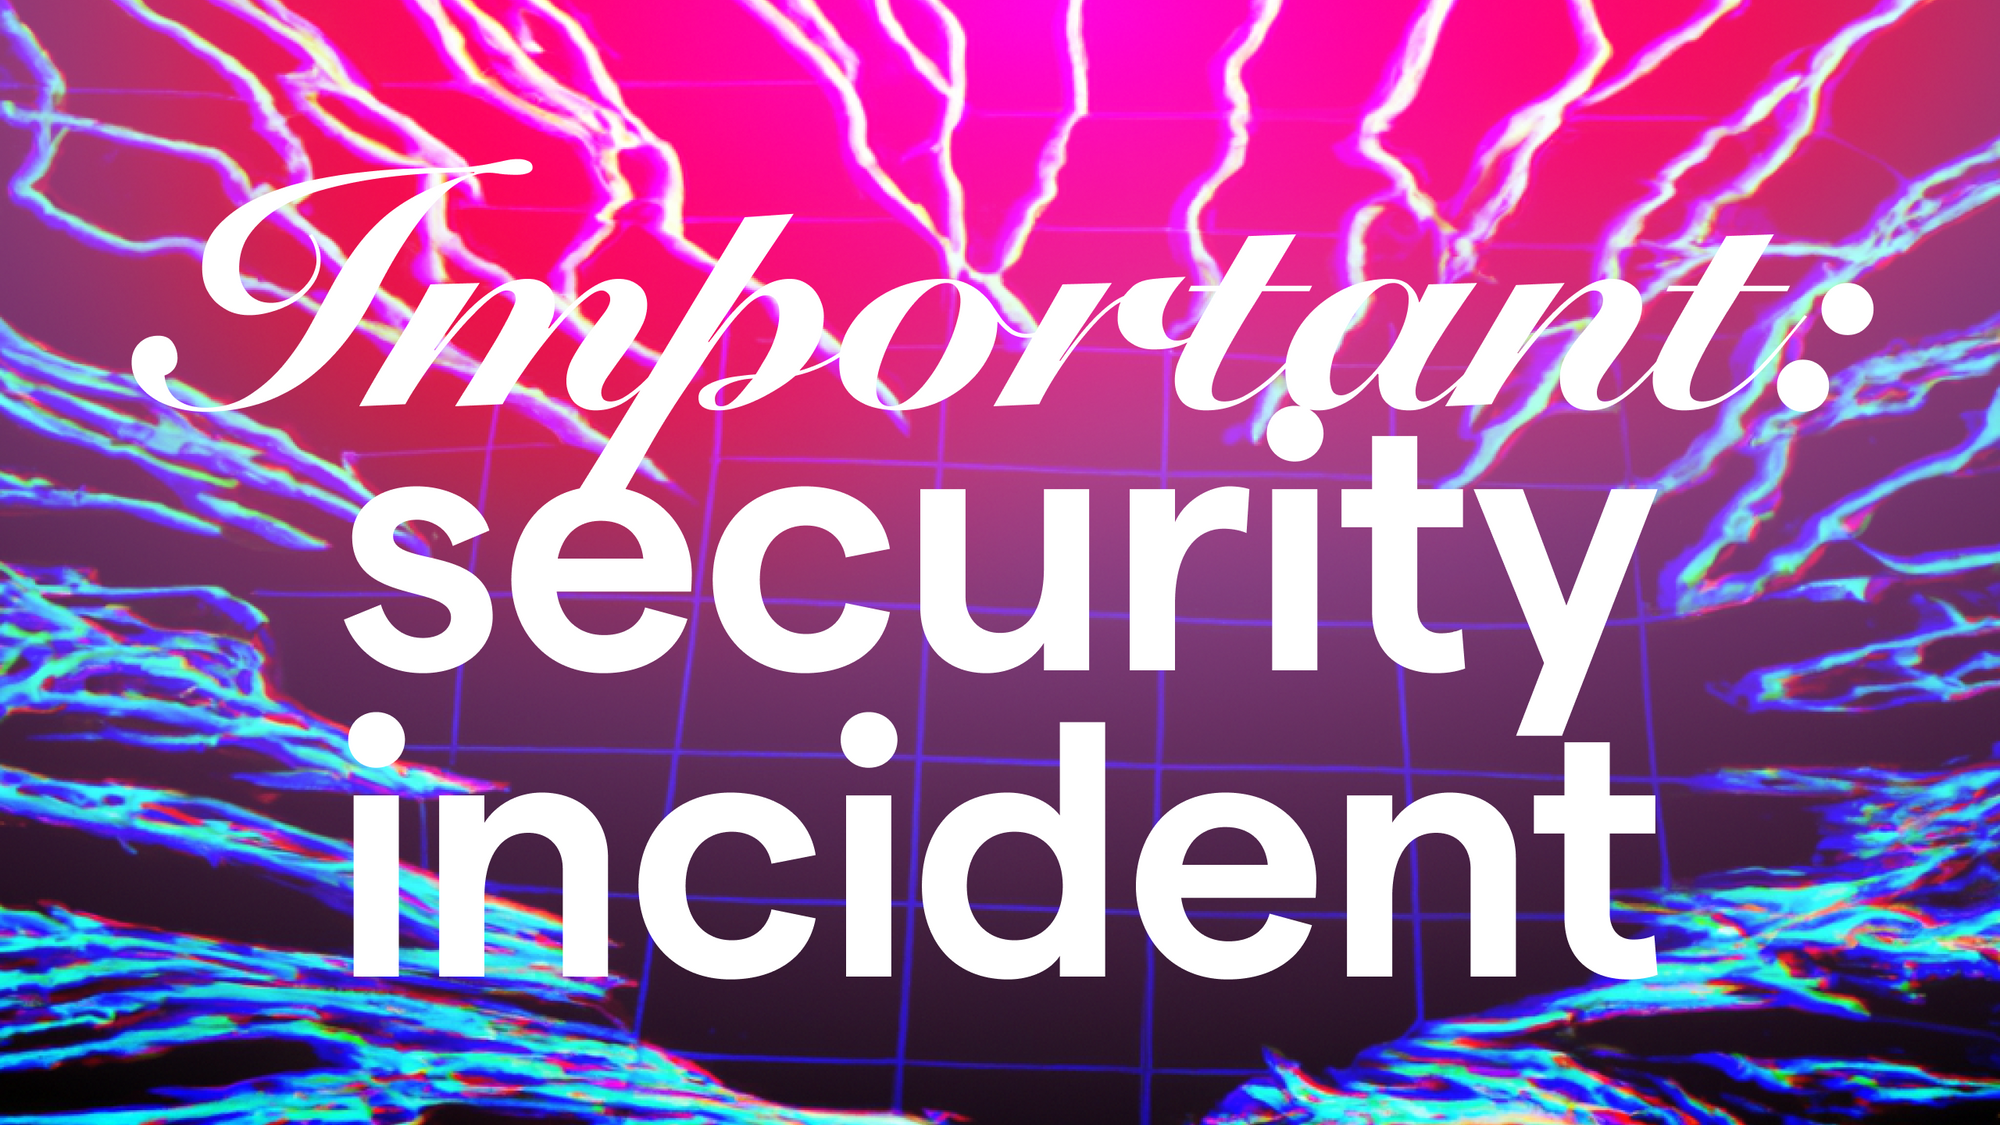 Important: email service provider security incident